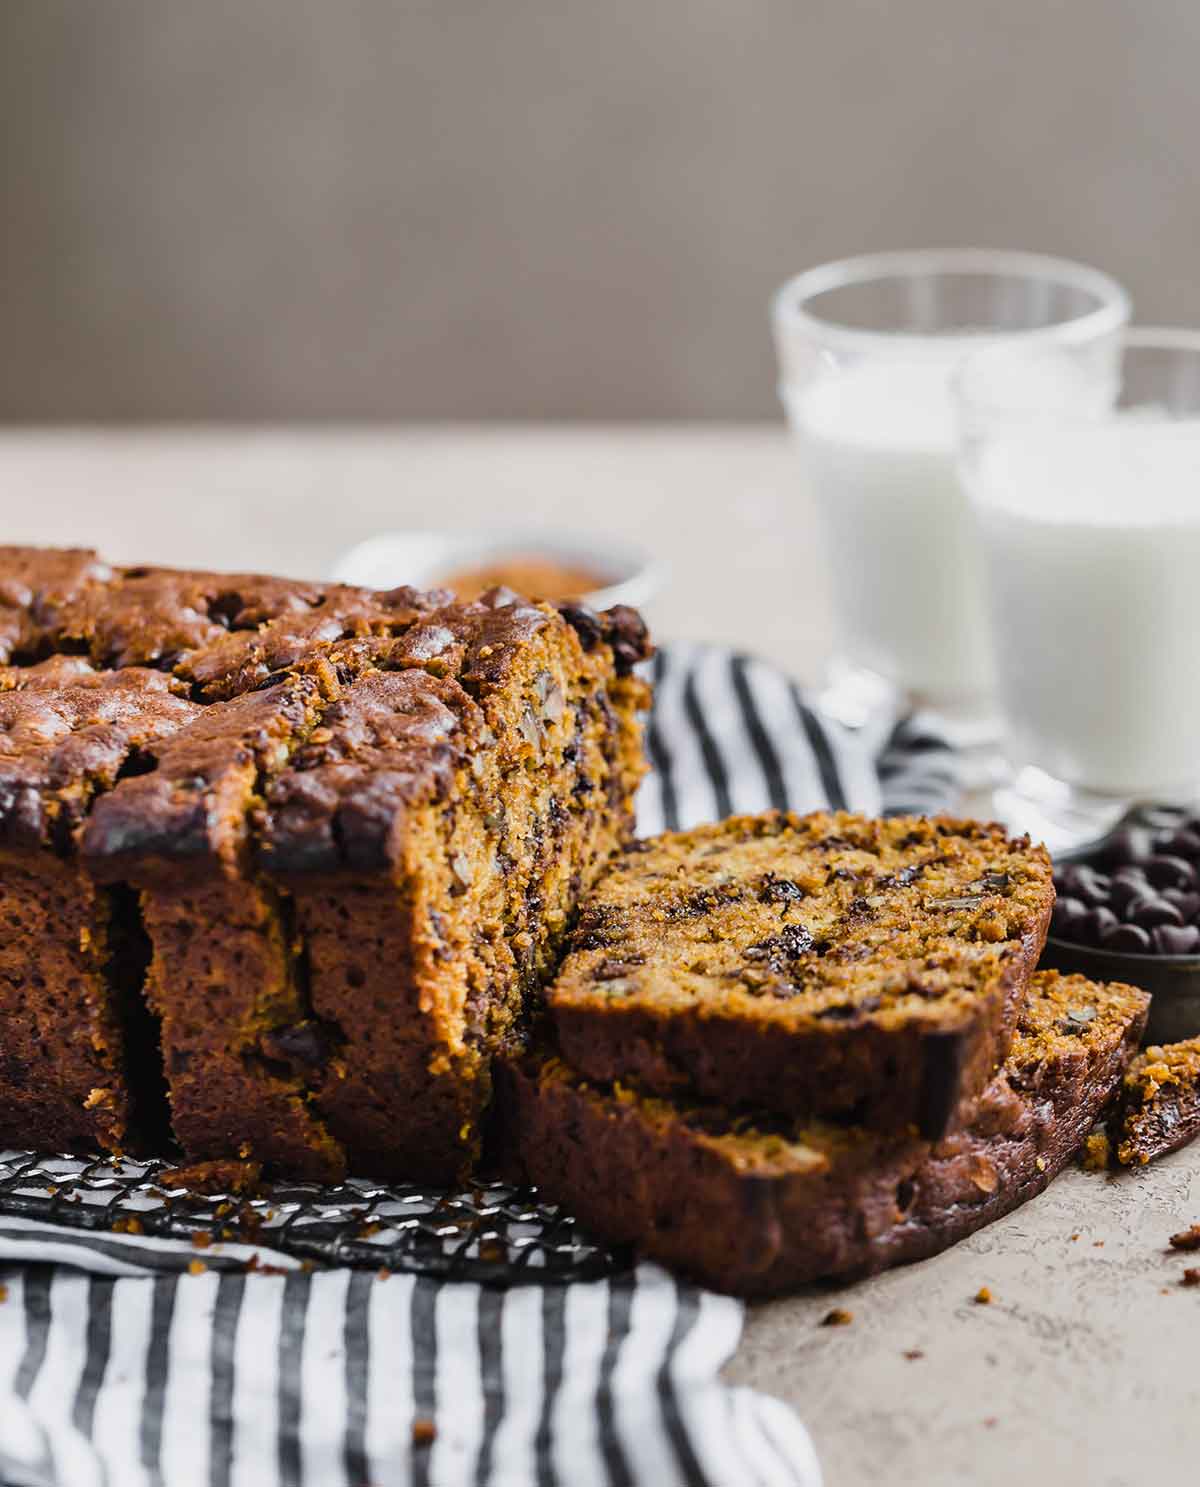 Pumpkin bread with chocolate chips and pecans sliced on a tea towel with glasses of milk in the background.